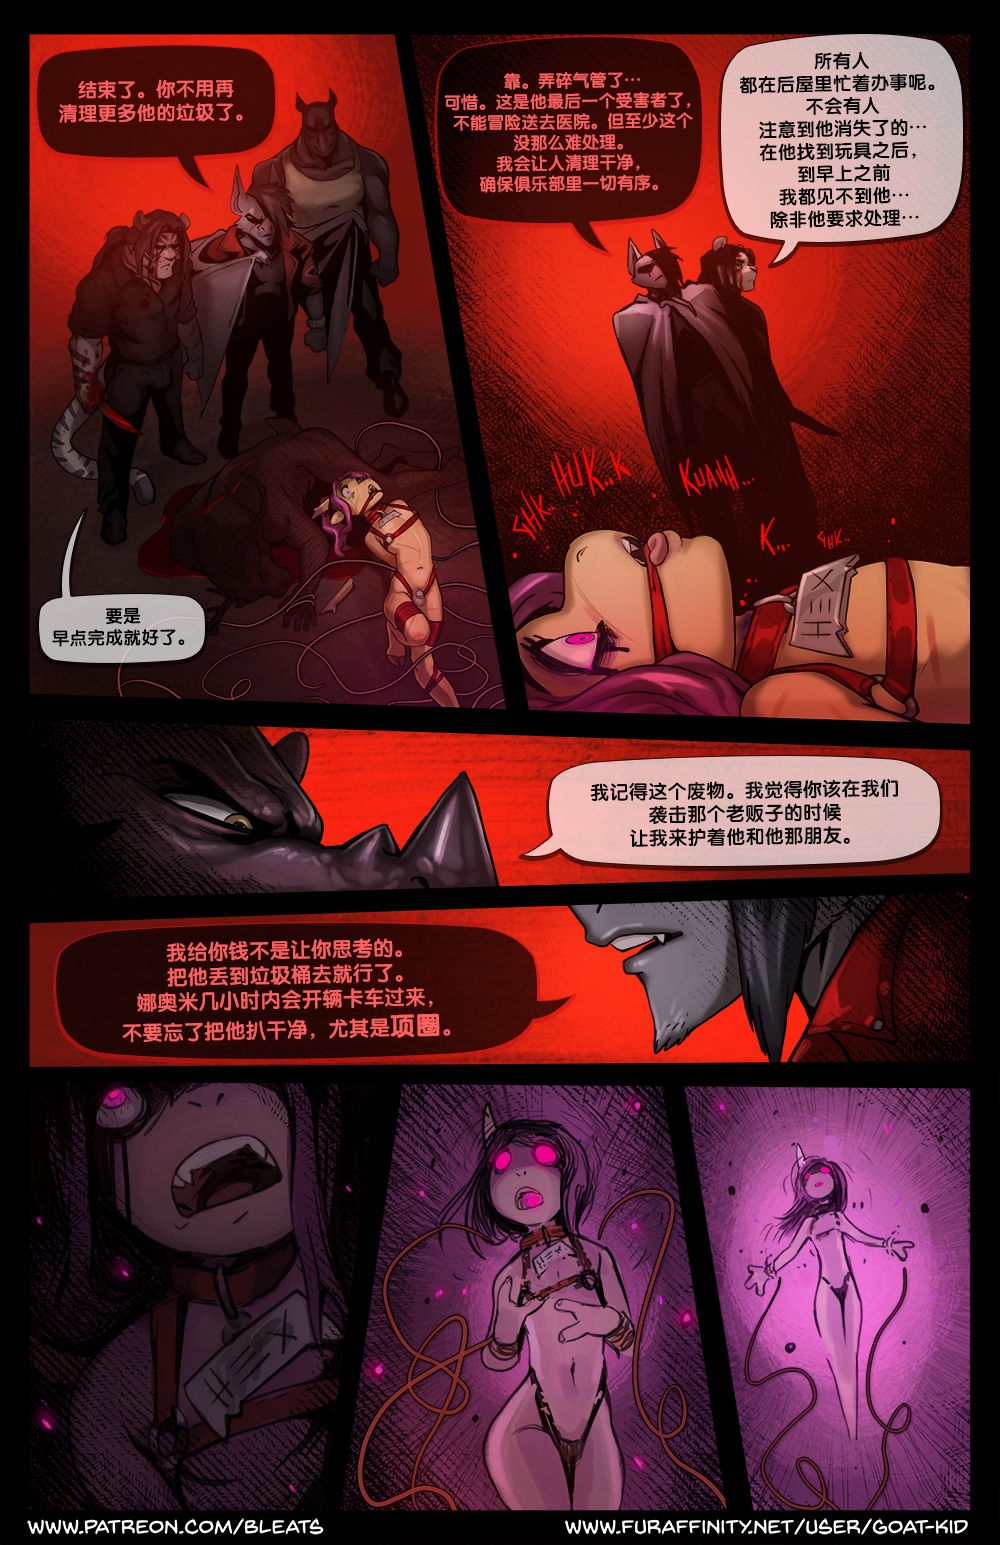 [goat-kid] Scattered issue 2 [Chinese] [逃亡者x新桥月白日语社汉化] 44